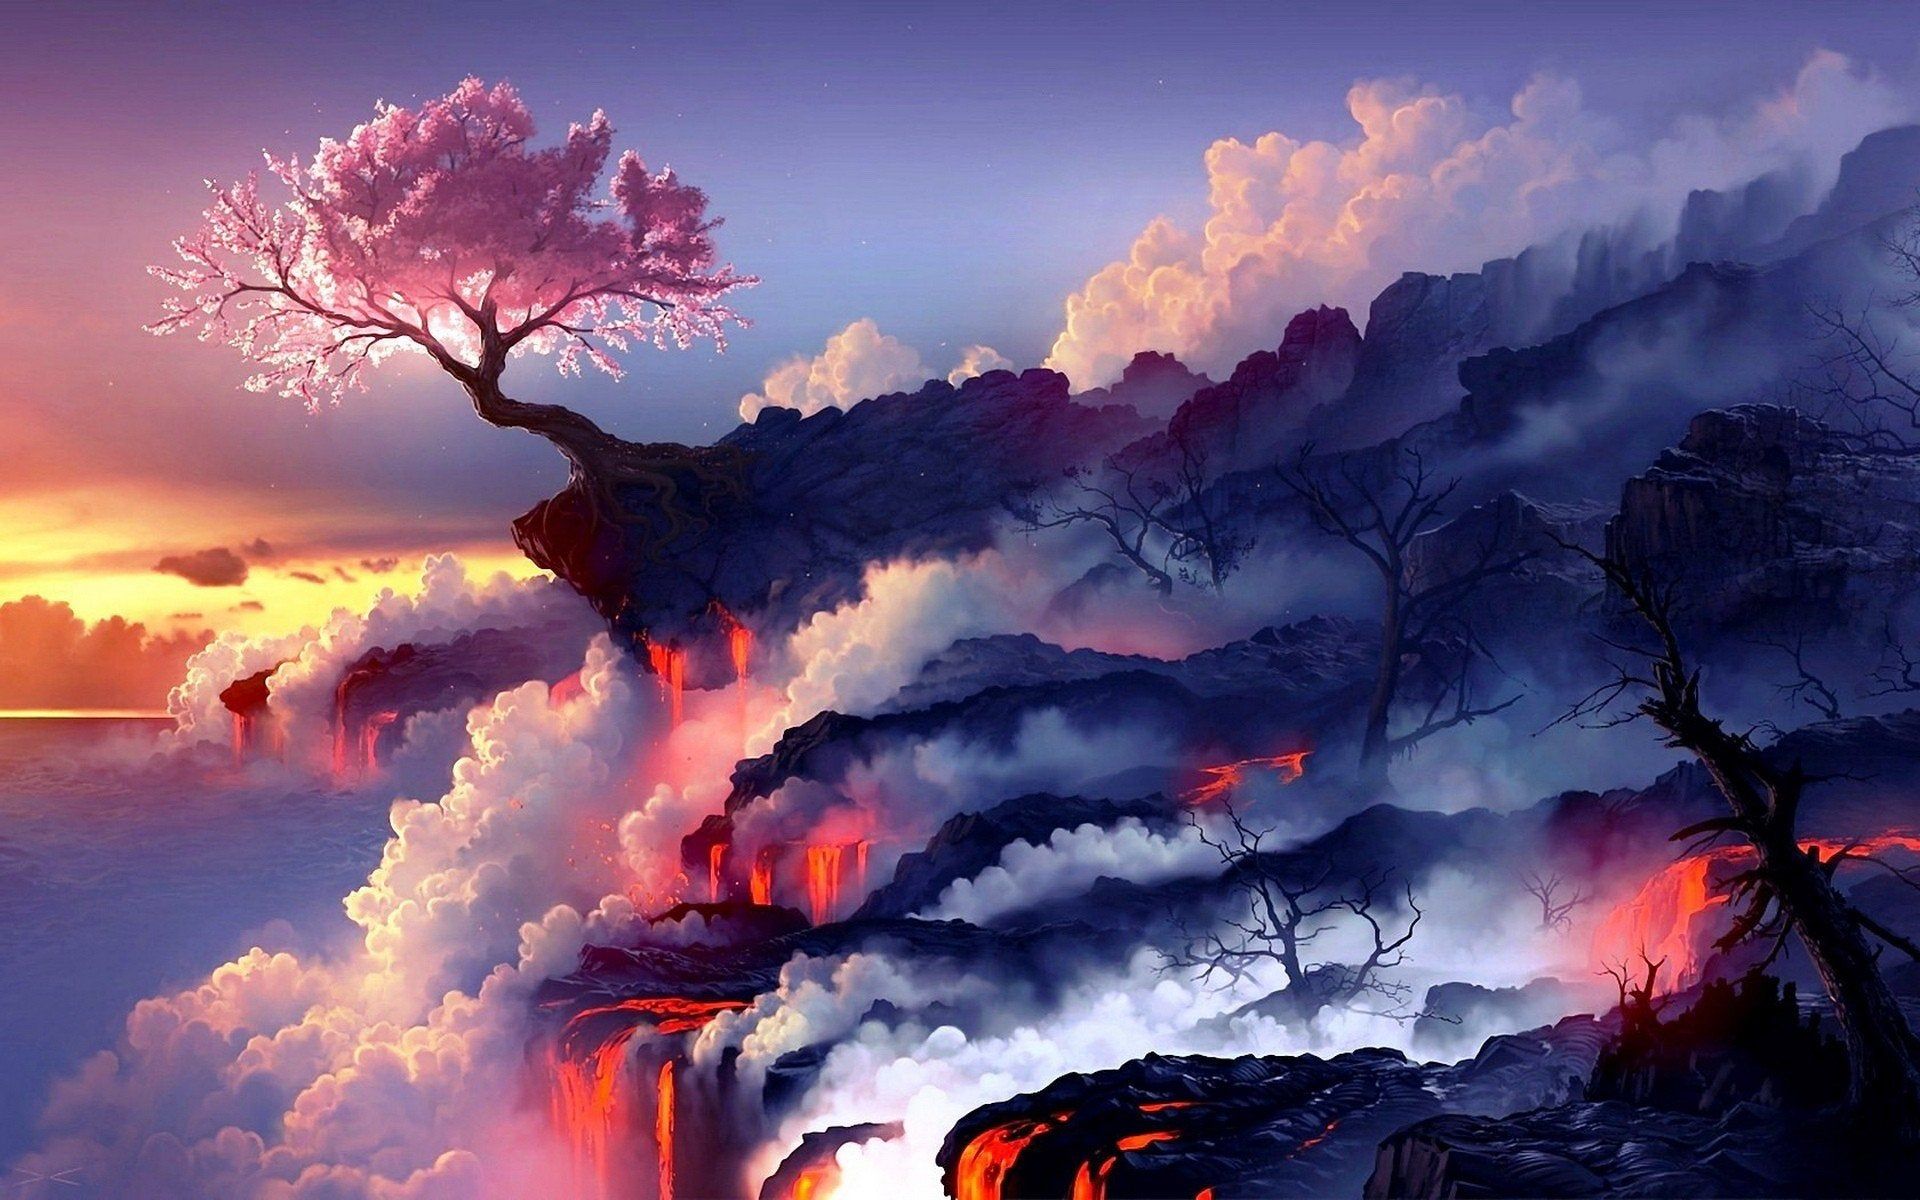 Cherry blossoms and lava